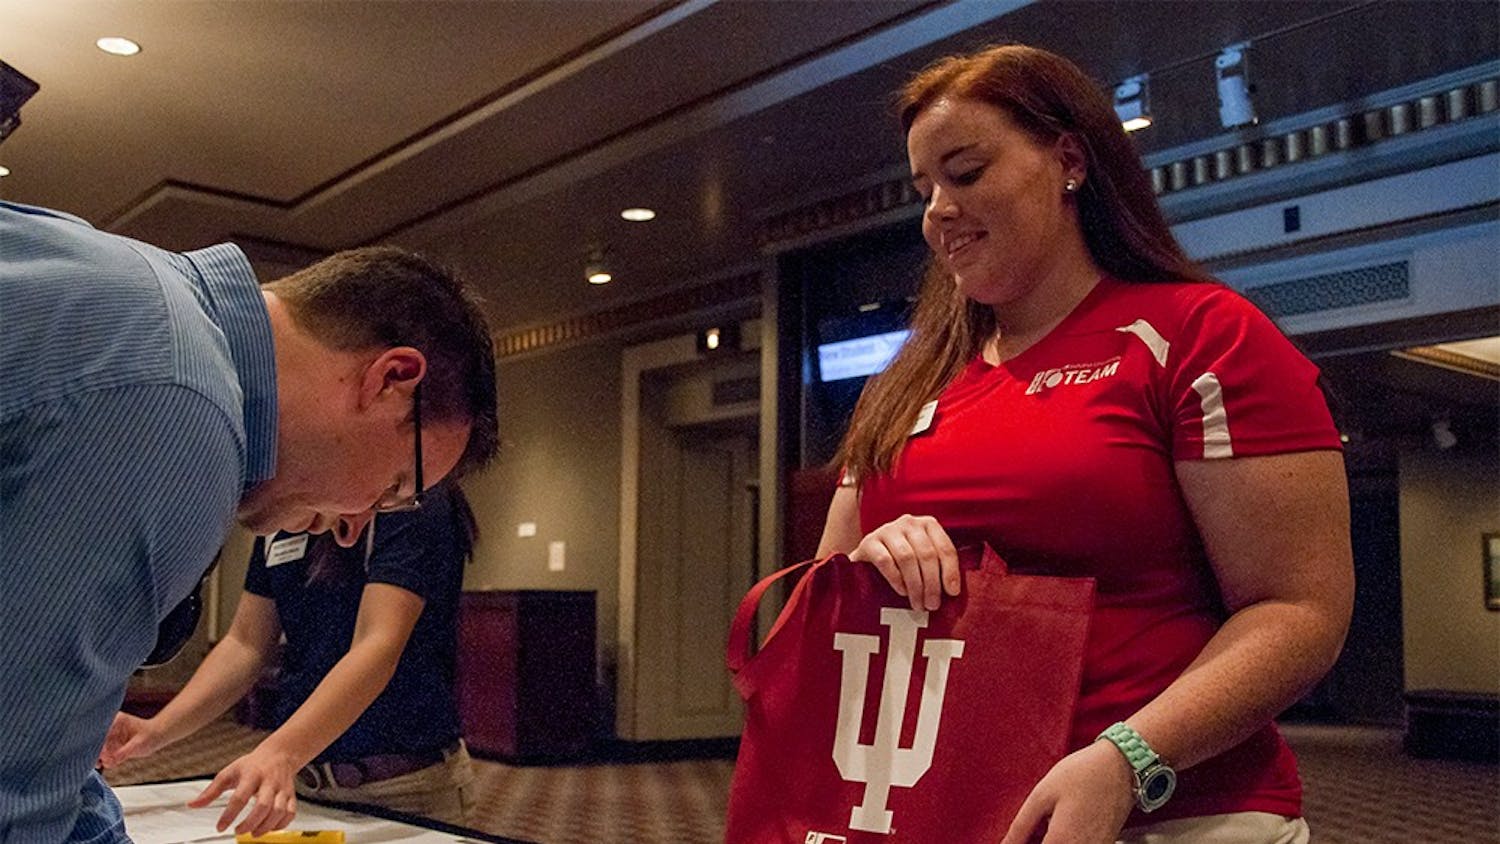 Jordan Spoor, a senior student who studies Elementary Education, helps a student parent to sign in on Monday afternoon at the Indiana University Auditorium. She was one of the program leaders on new student orientation team.